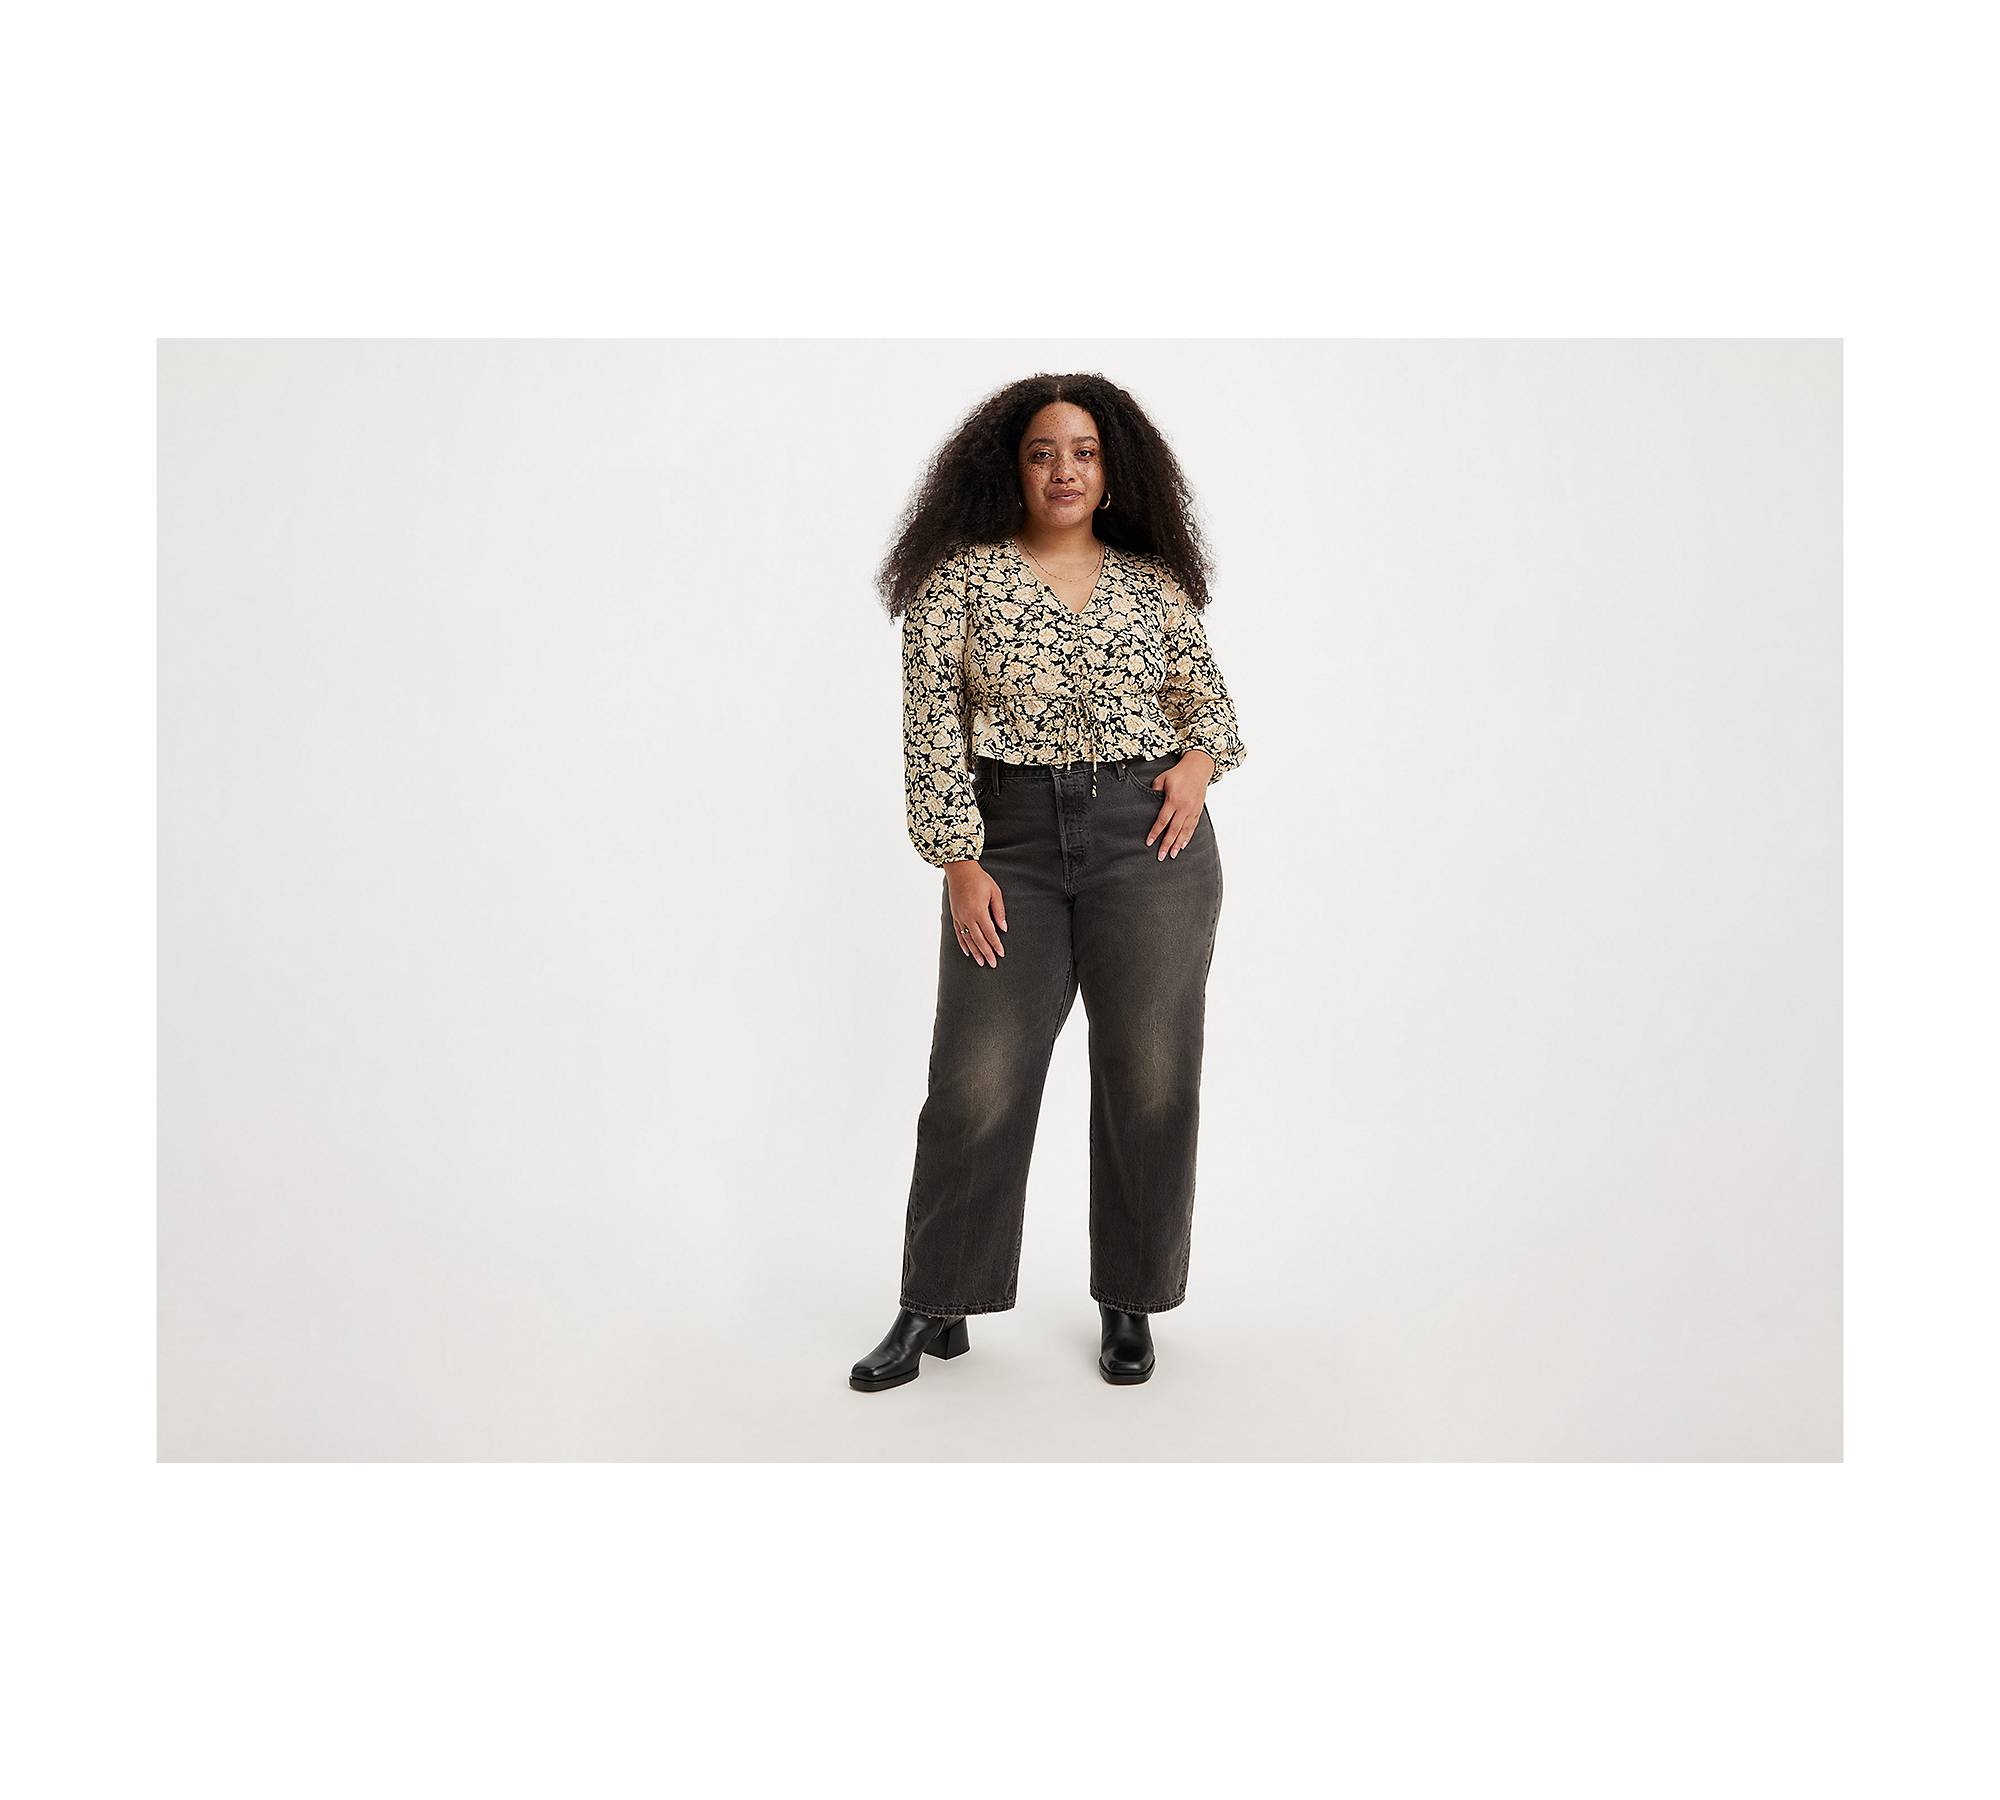 Women's Tall Plus Size Jeans: Where to Find Them, by Inseam!